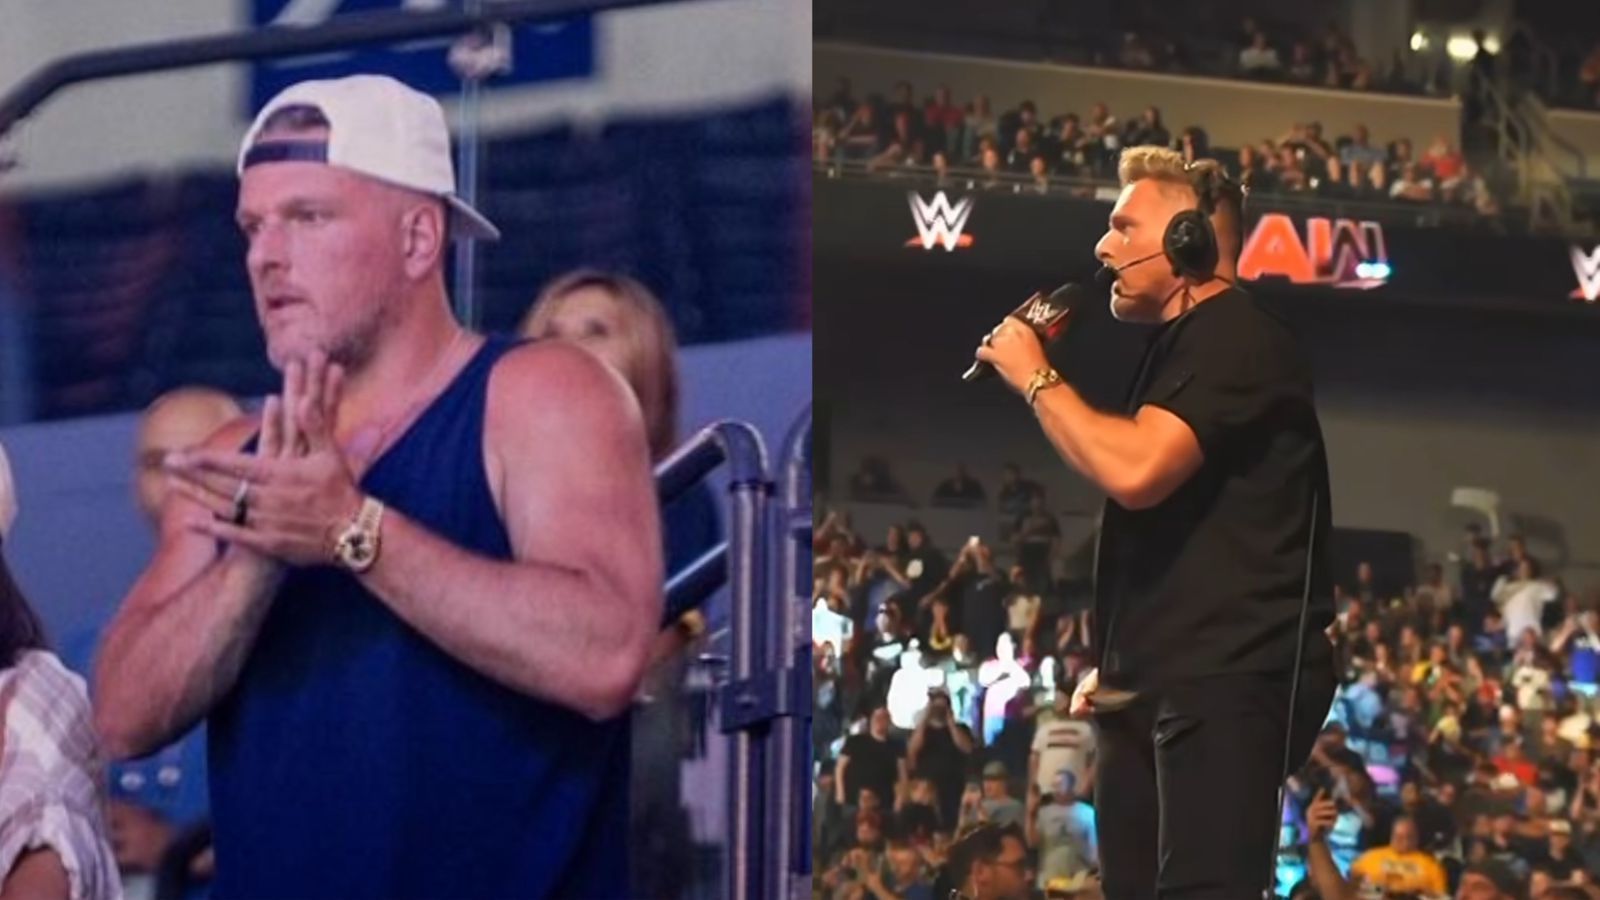 Pat McAfee is a part of WWE since 2018!